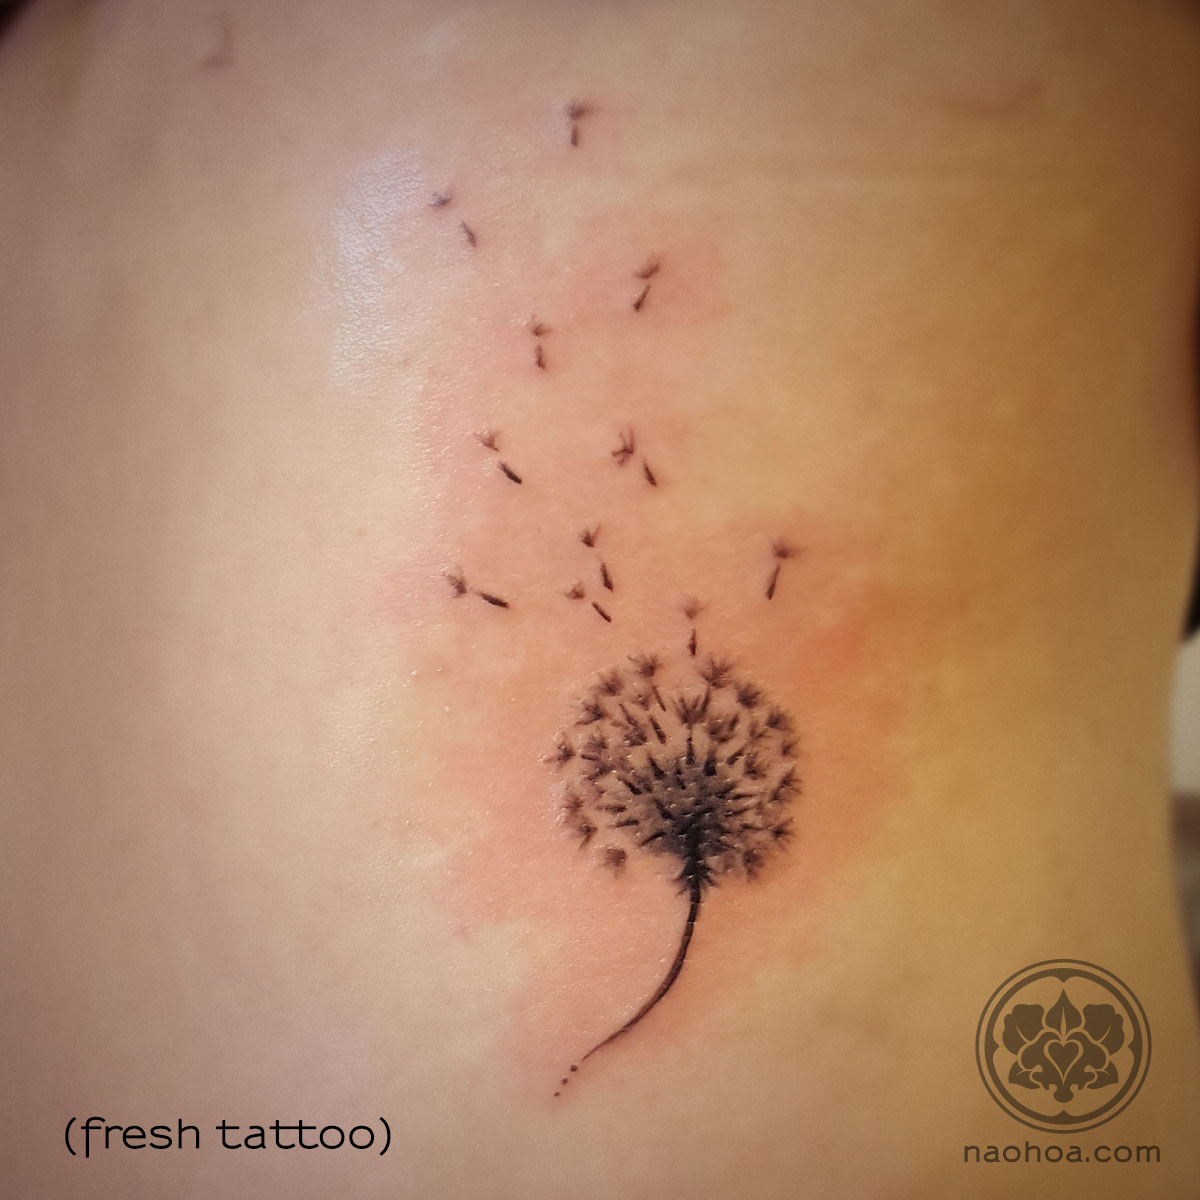 Tattoo of a delicate dandilion, blowing gently in the wind. Designed and tattooed by Naomi Hoang at NAOHOA Luxury Bespoke Tattoos, Cardiff (Wales, UK).